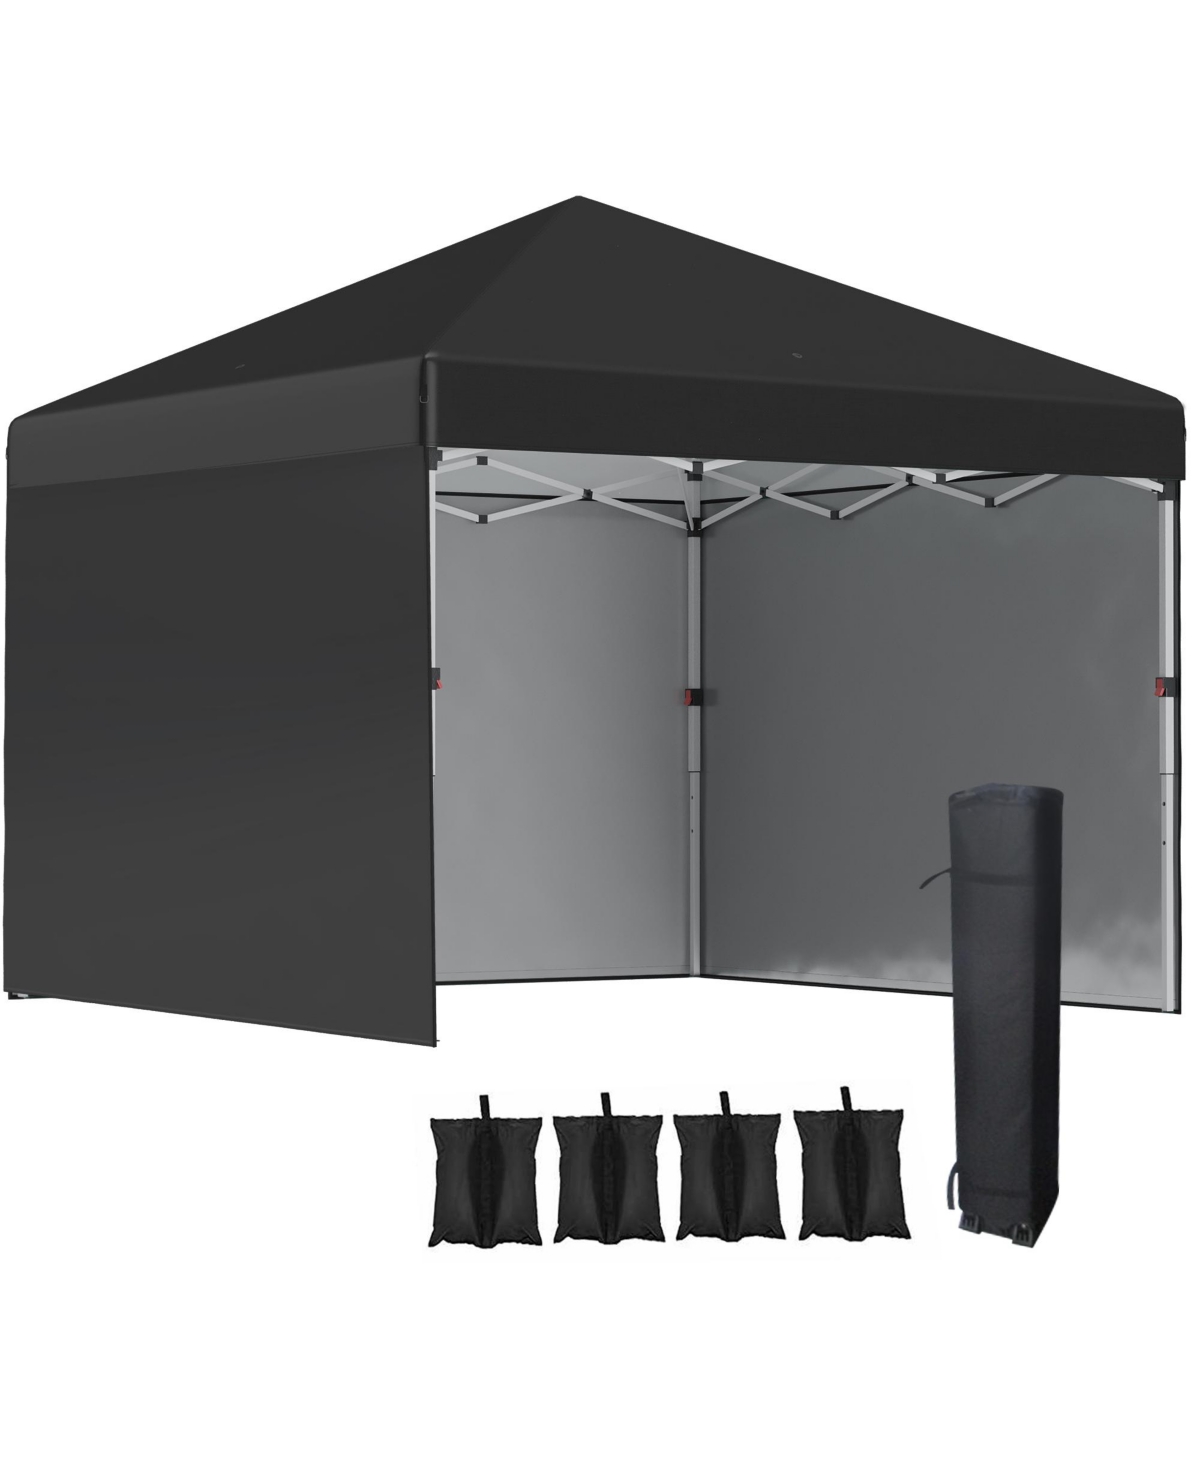 10' x 10' Pop Up Canopy Tent with 3 Sidewalls, Leg Weight Bags and Carry Bag, Height Adjustable Party Tent Event Shelter Gazebo for Garden, P